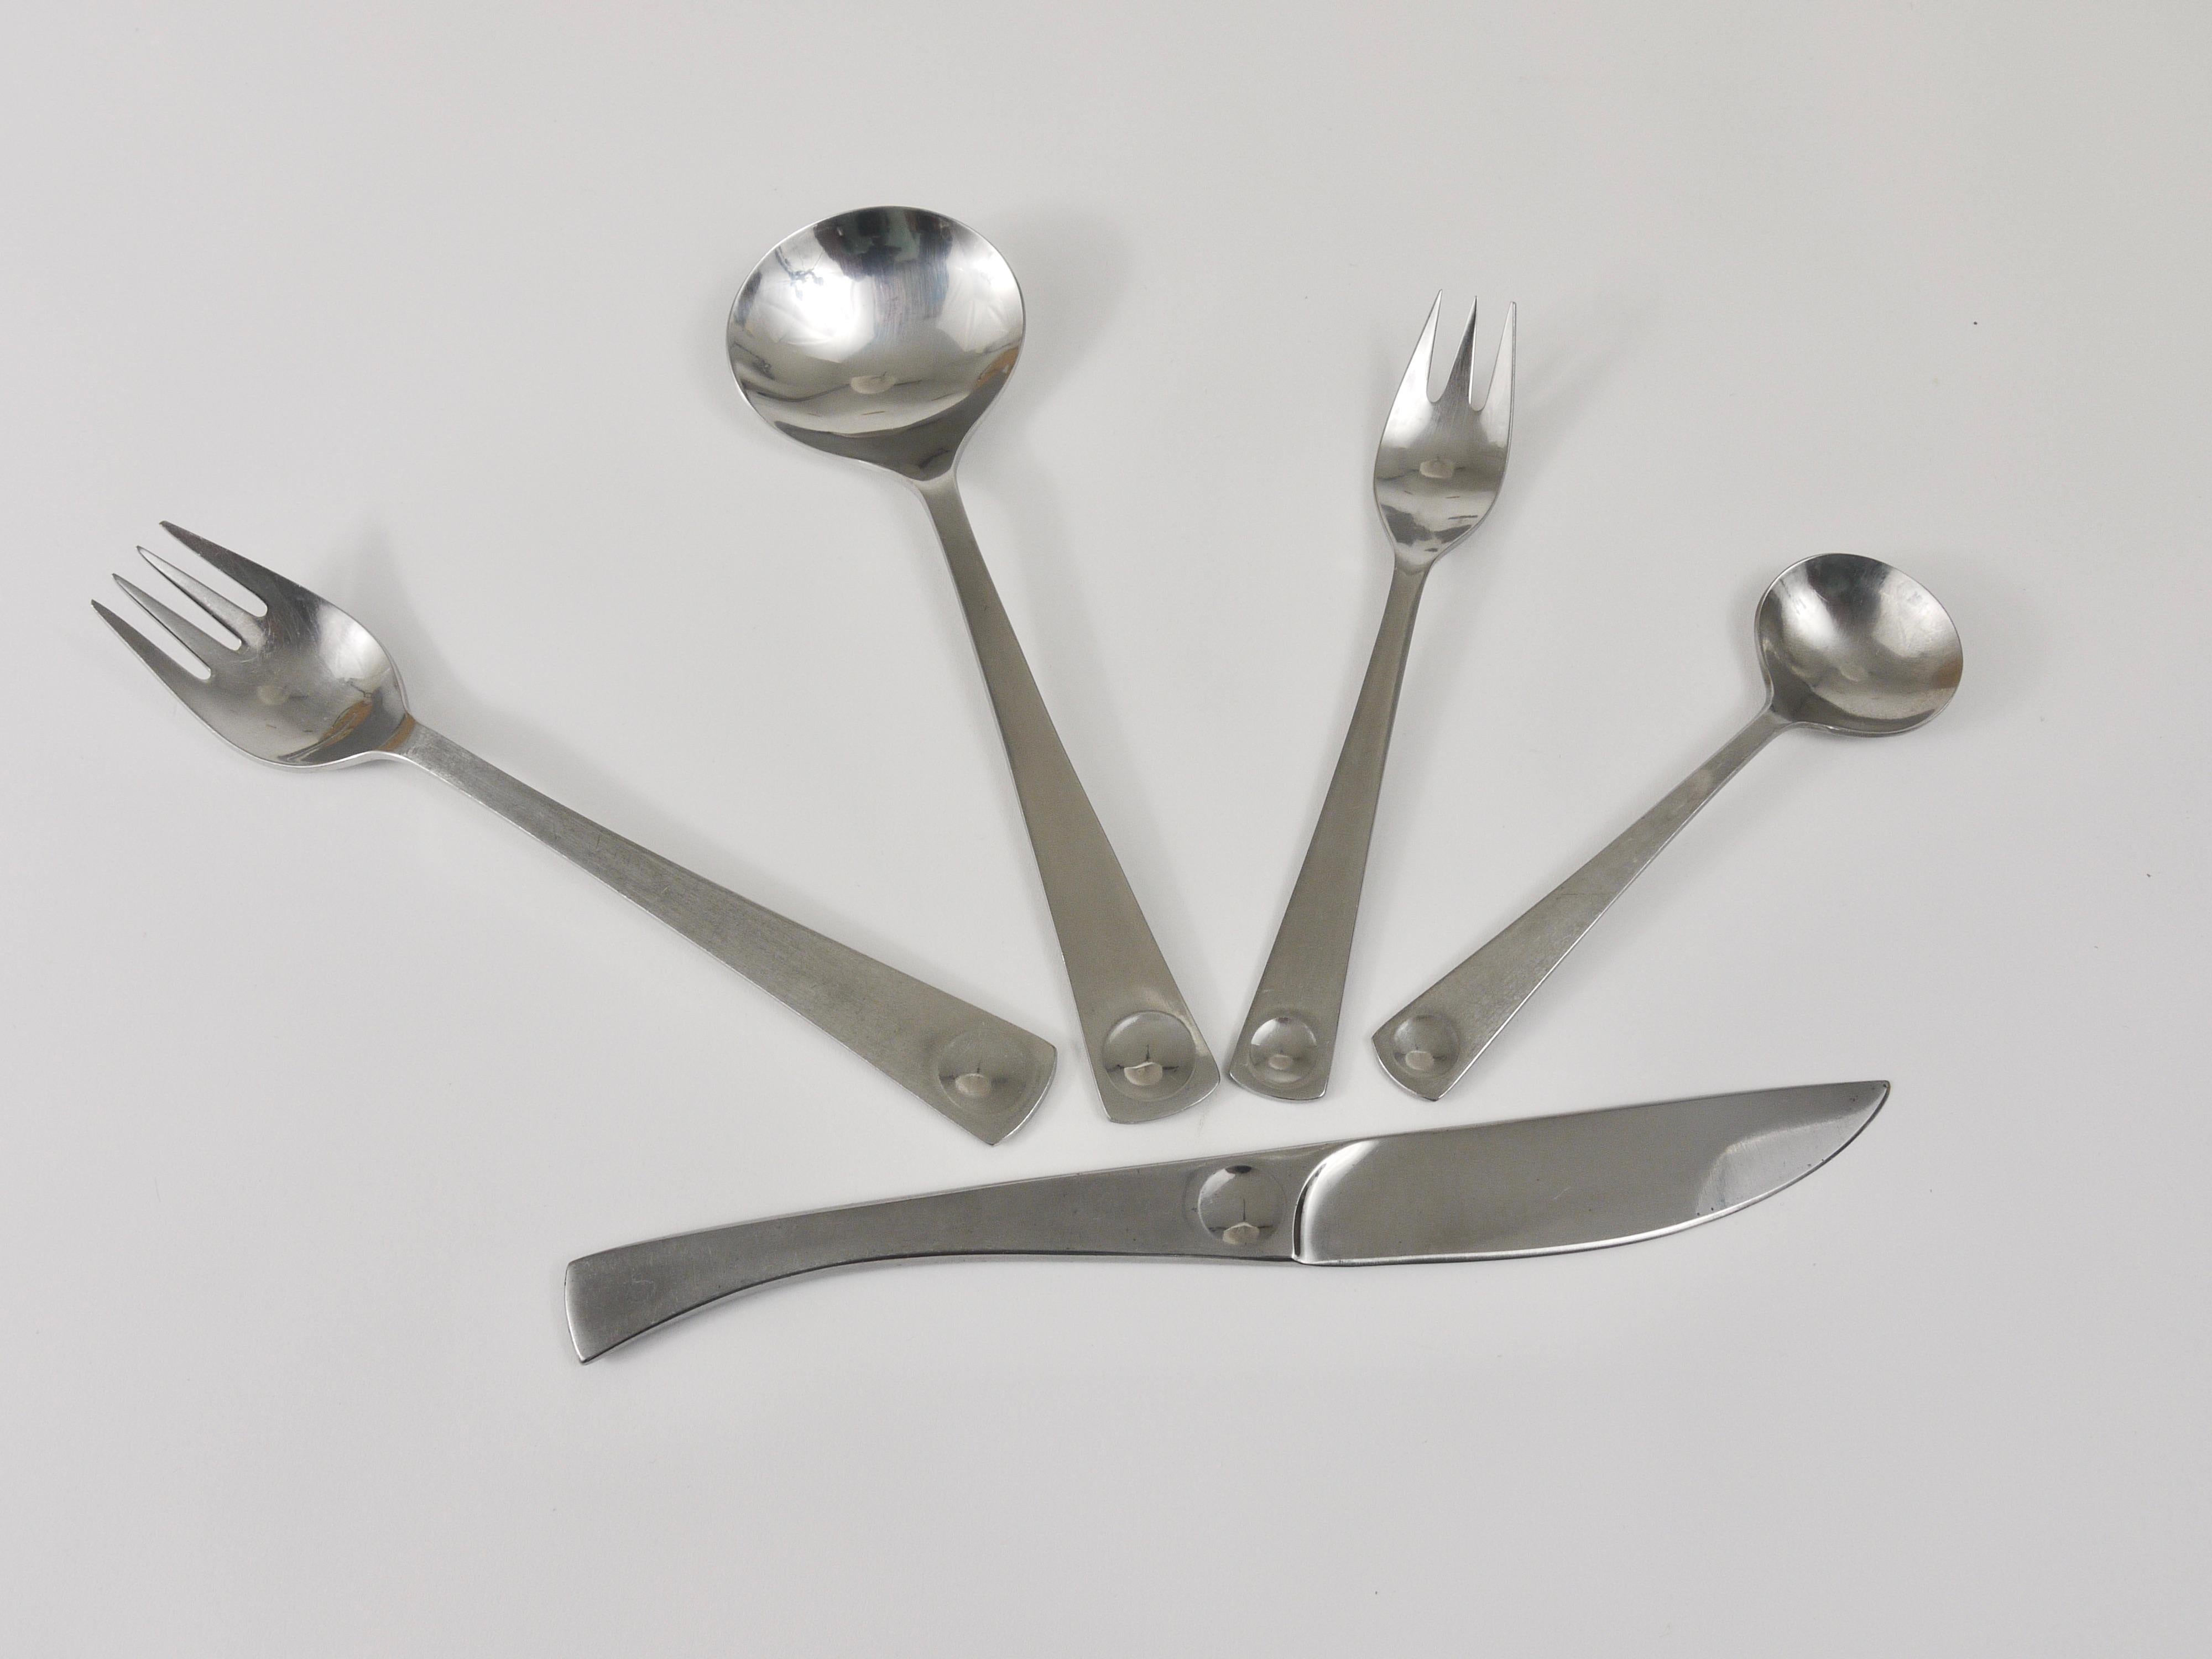 A comprehensive set of midcentury flatware / cutlery from the 1970s. Out of the „Design Plus“ line, designed by Wolf Karnagel and executed by Rosenthal Germany. High-quality cutlery, solid, made of brushed and partly polished 18/8 stainless steel.